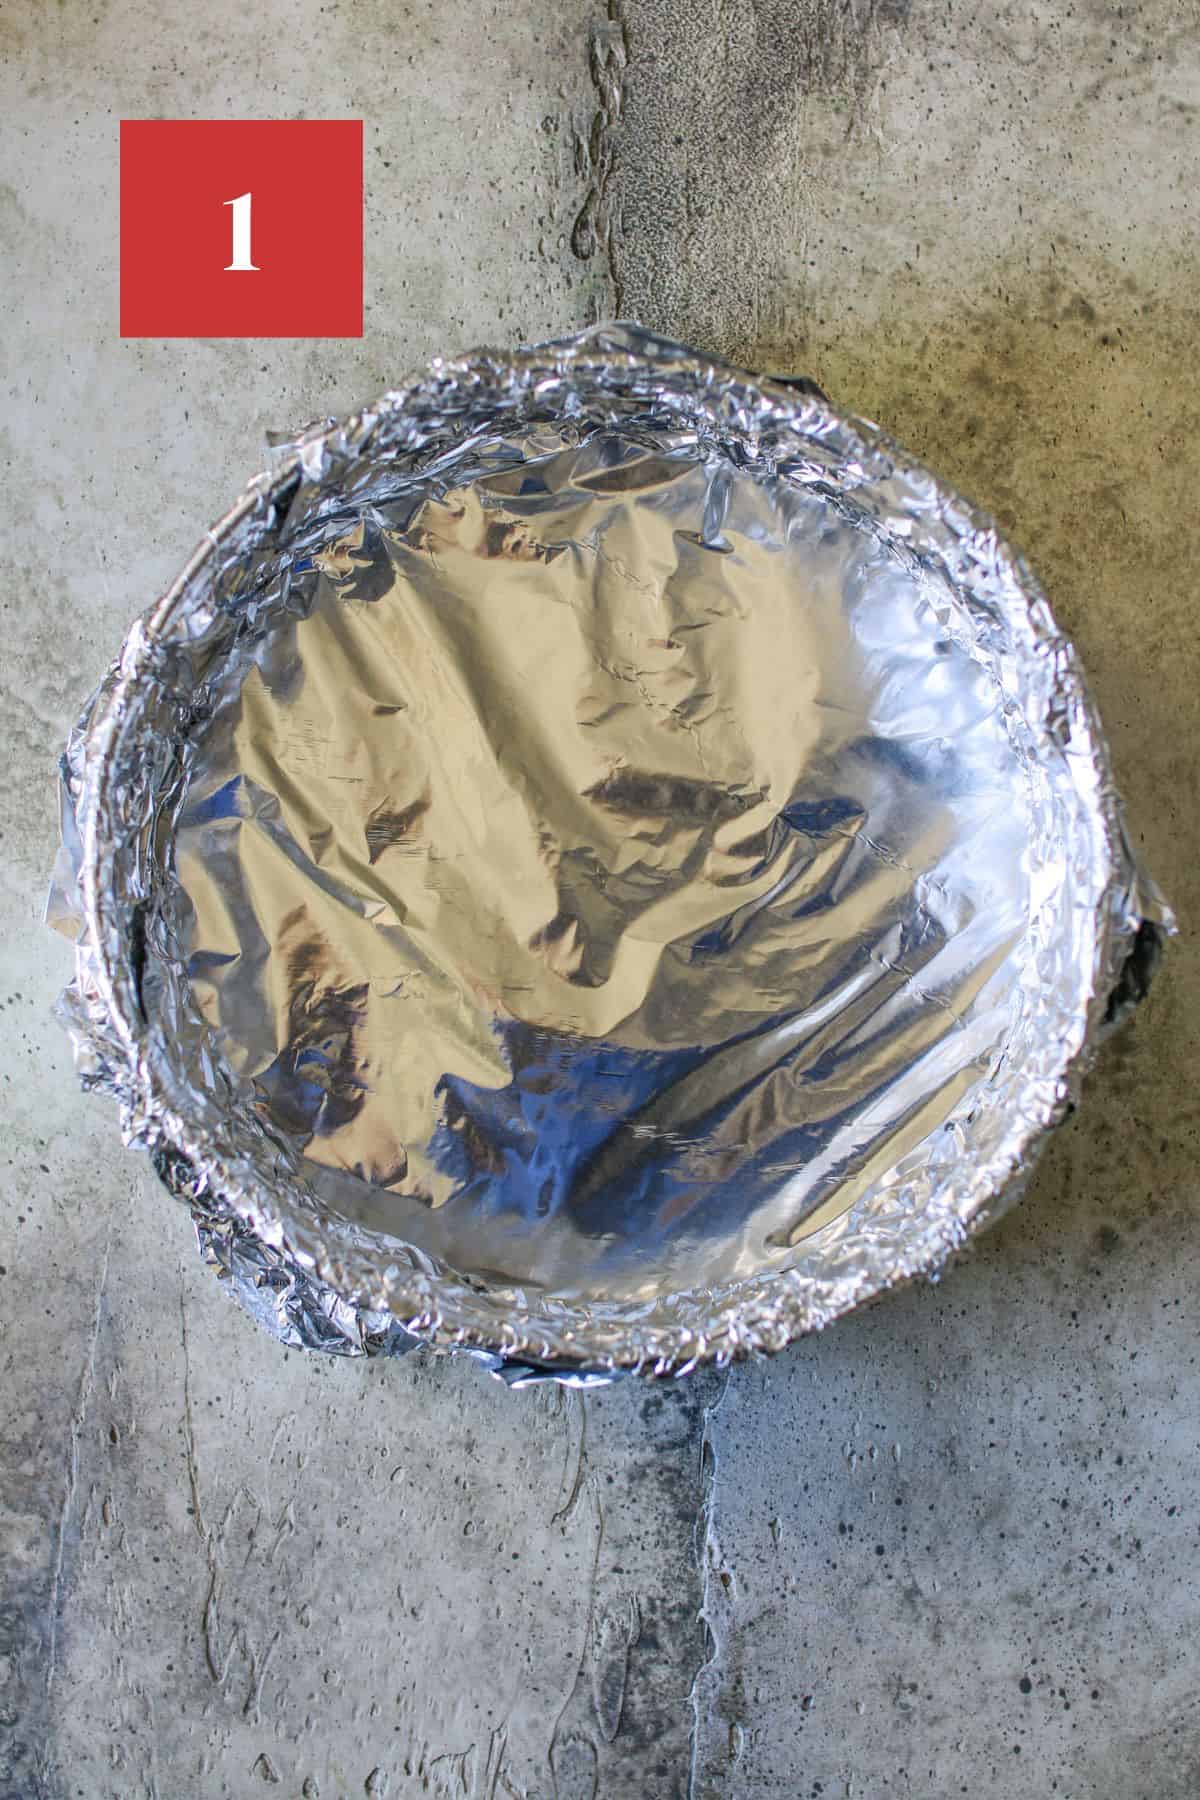 A springform pan wrapped in aluminum foil on a stone background. In the upper left corner is a dark red square with a white '1' in the center.